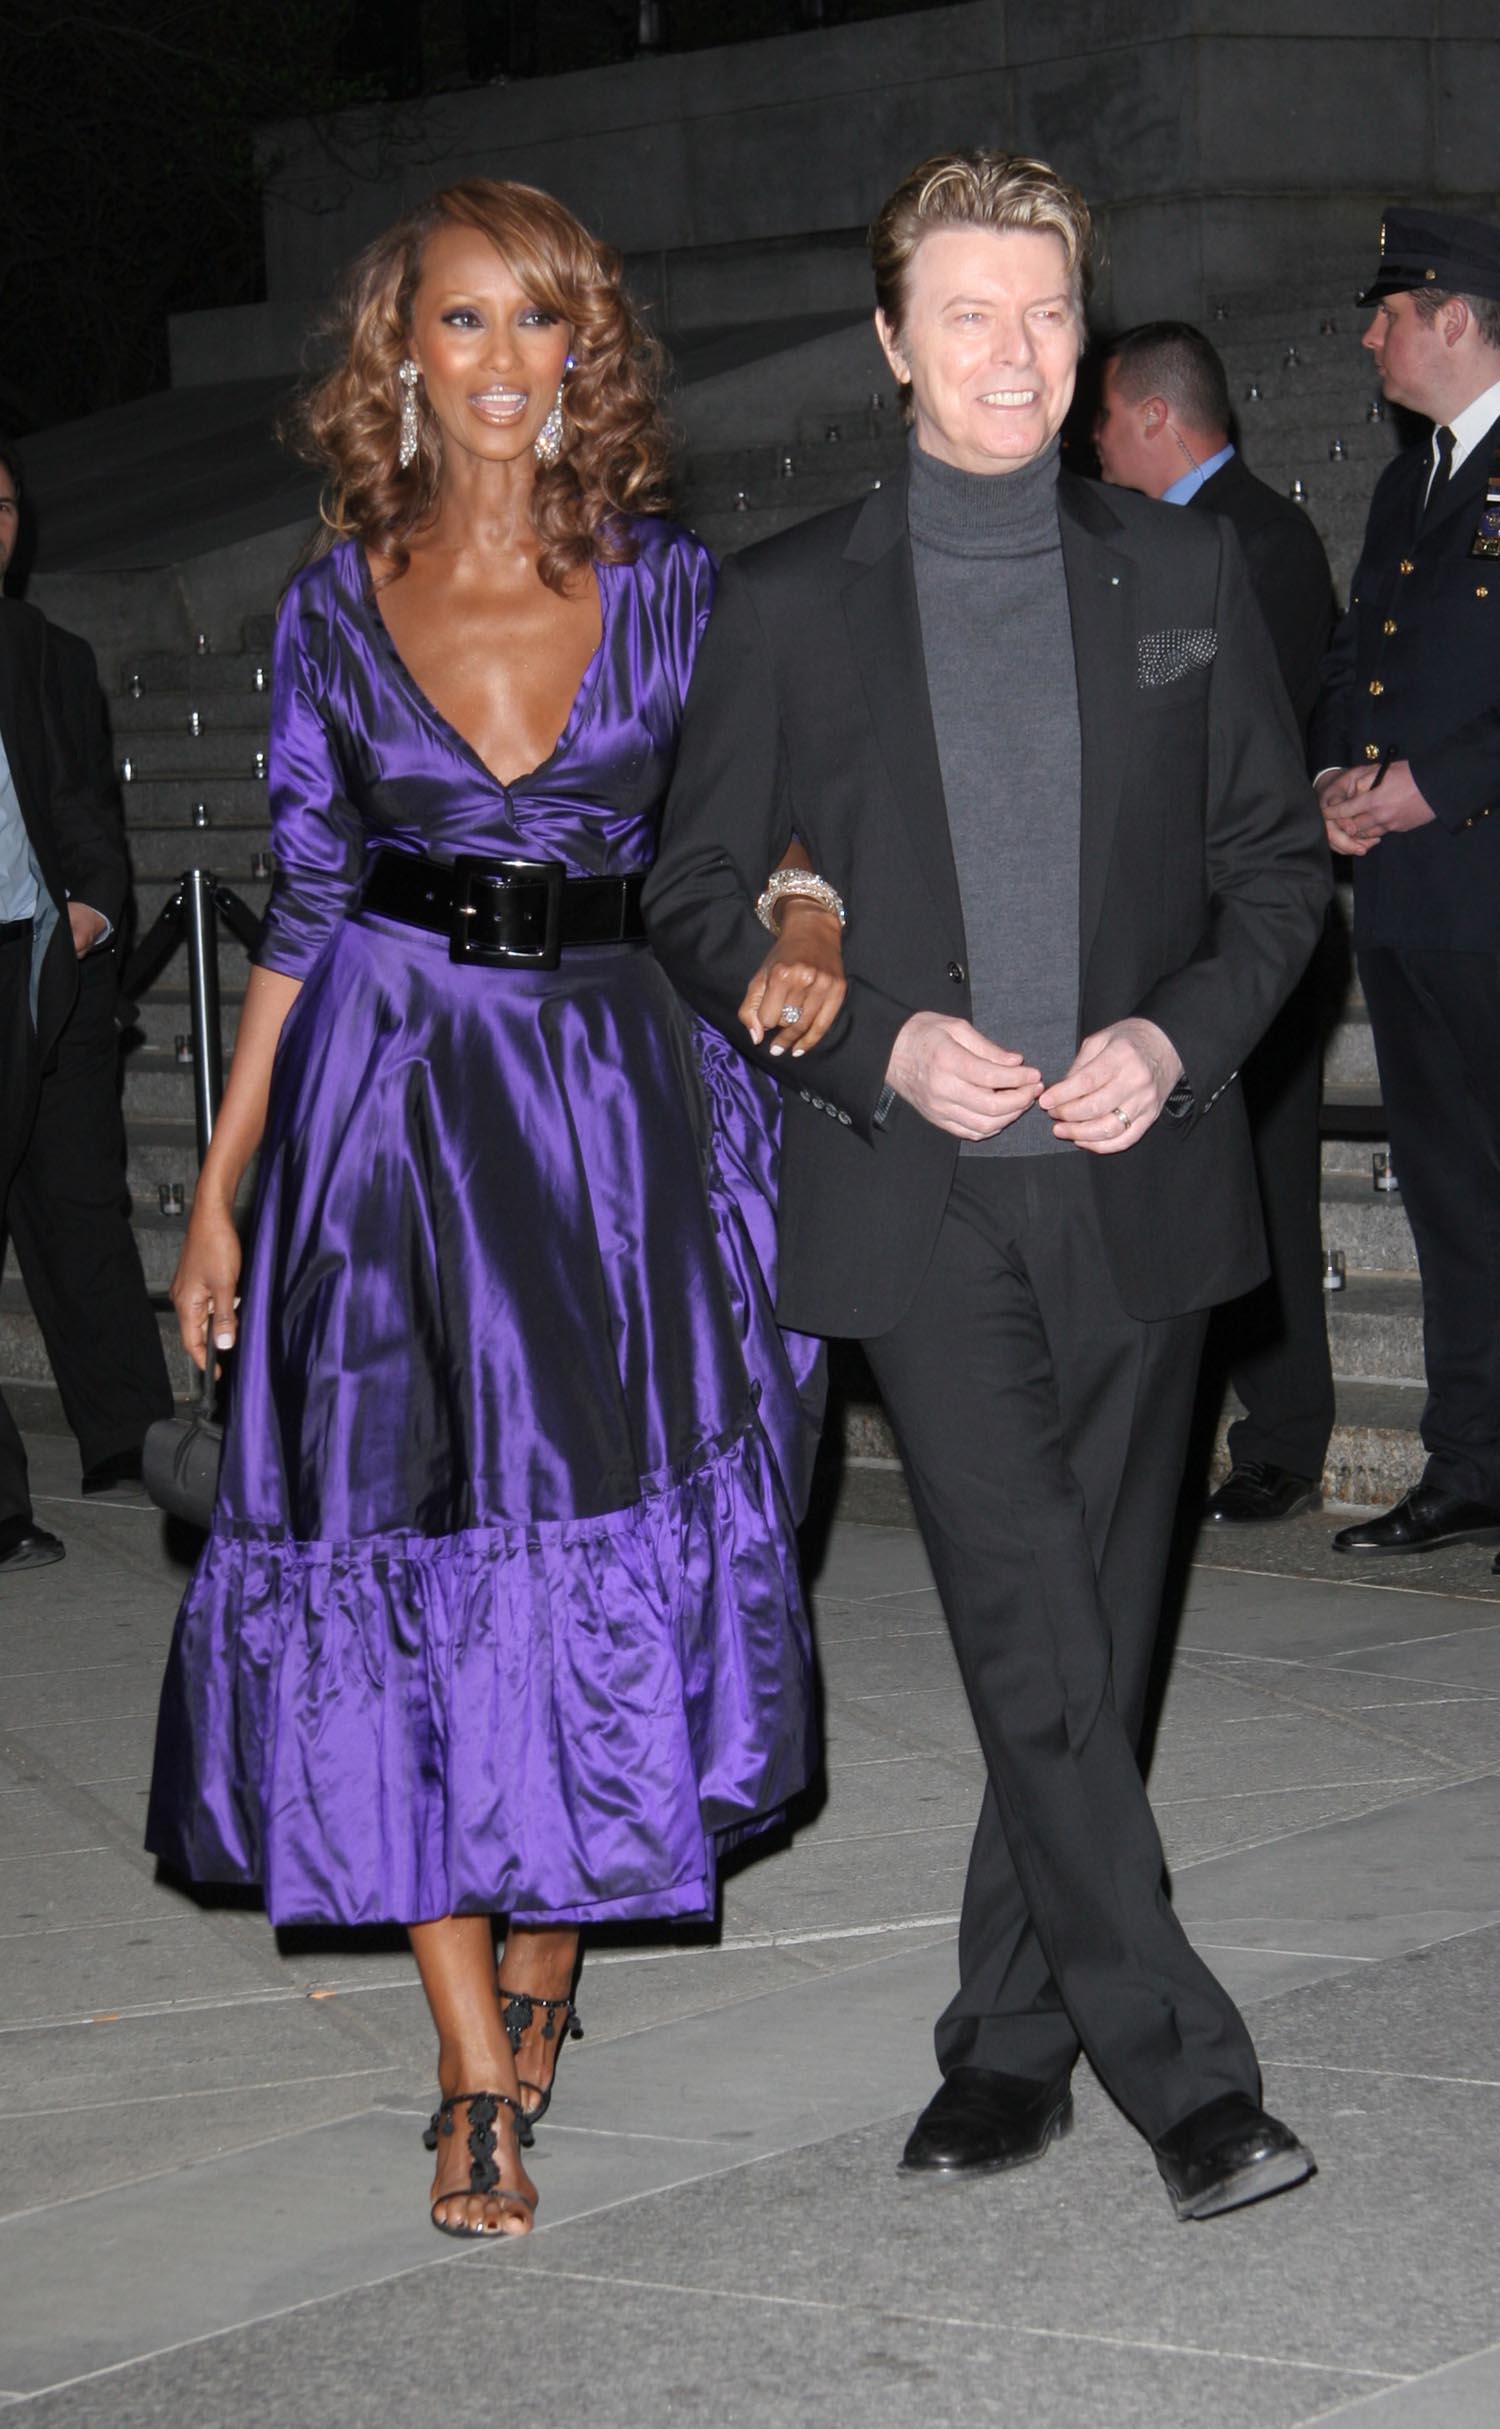 Iman and David Bowie walking together.